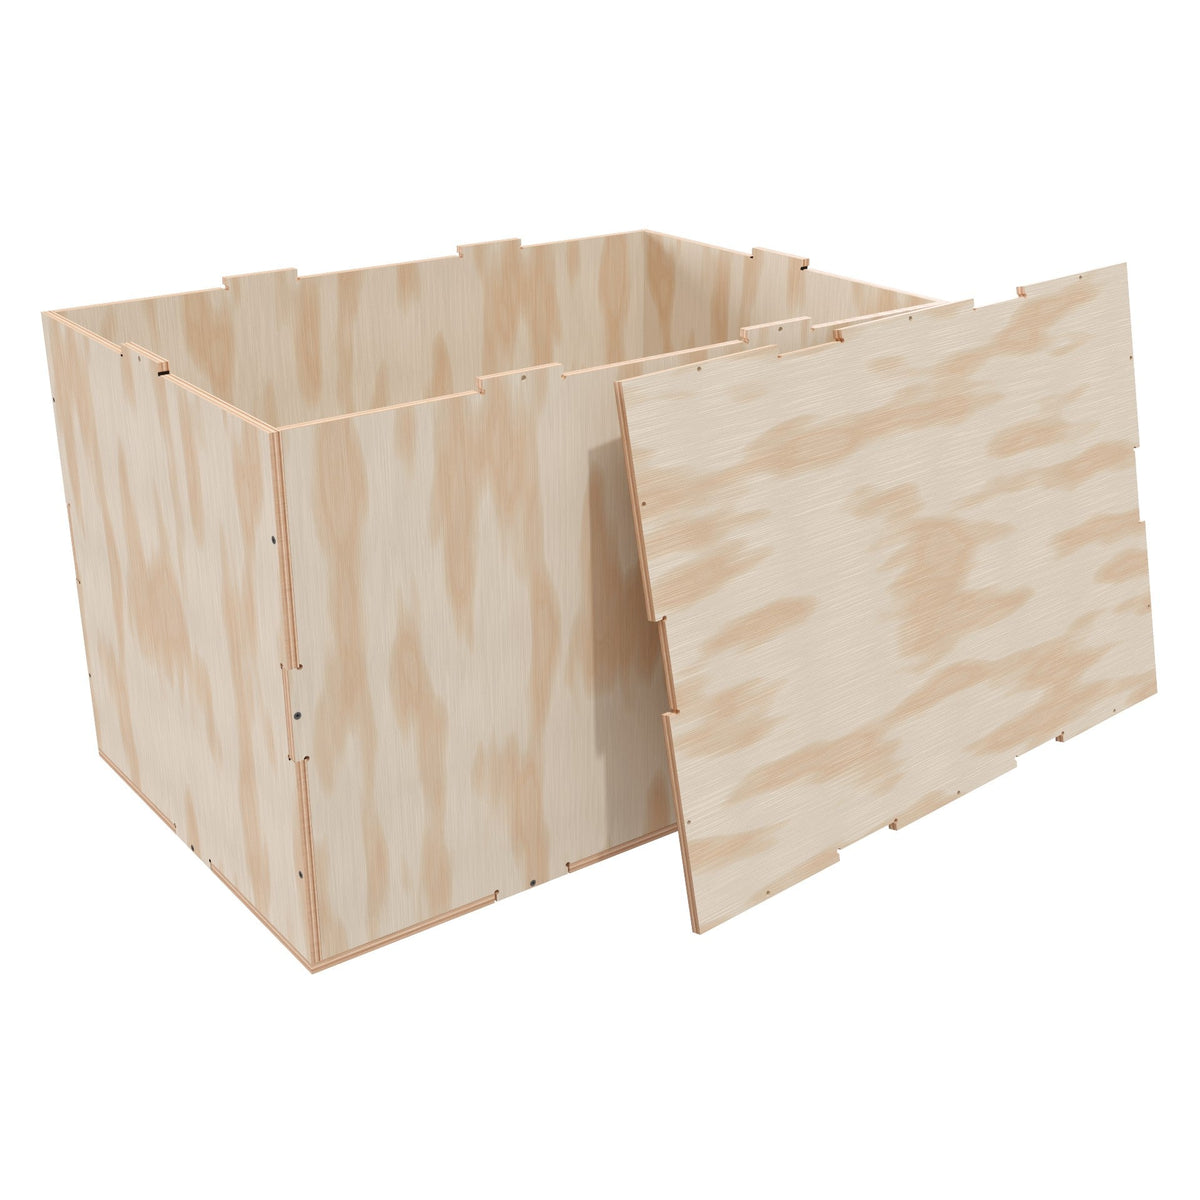 Plywood Shipping Crate 36x24x24